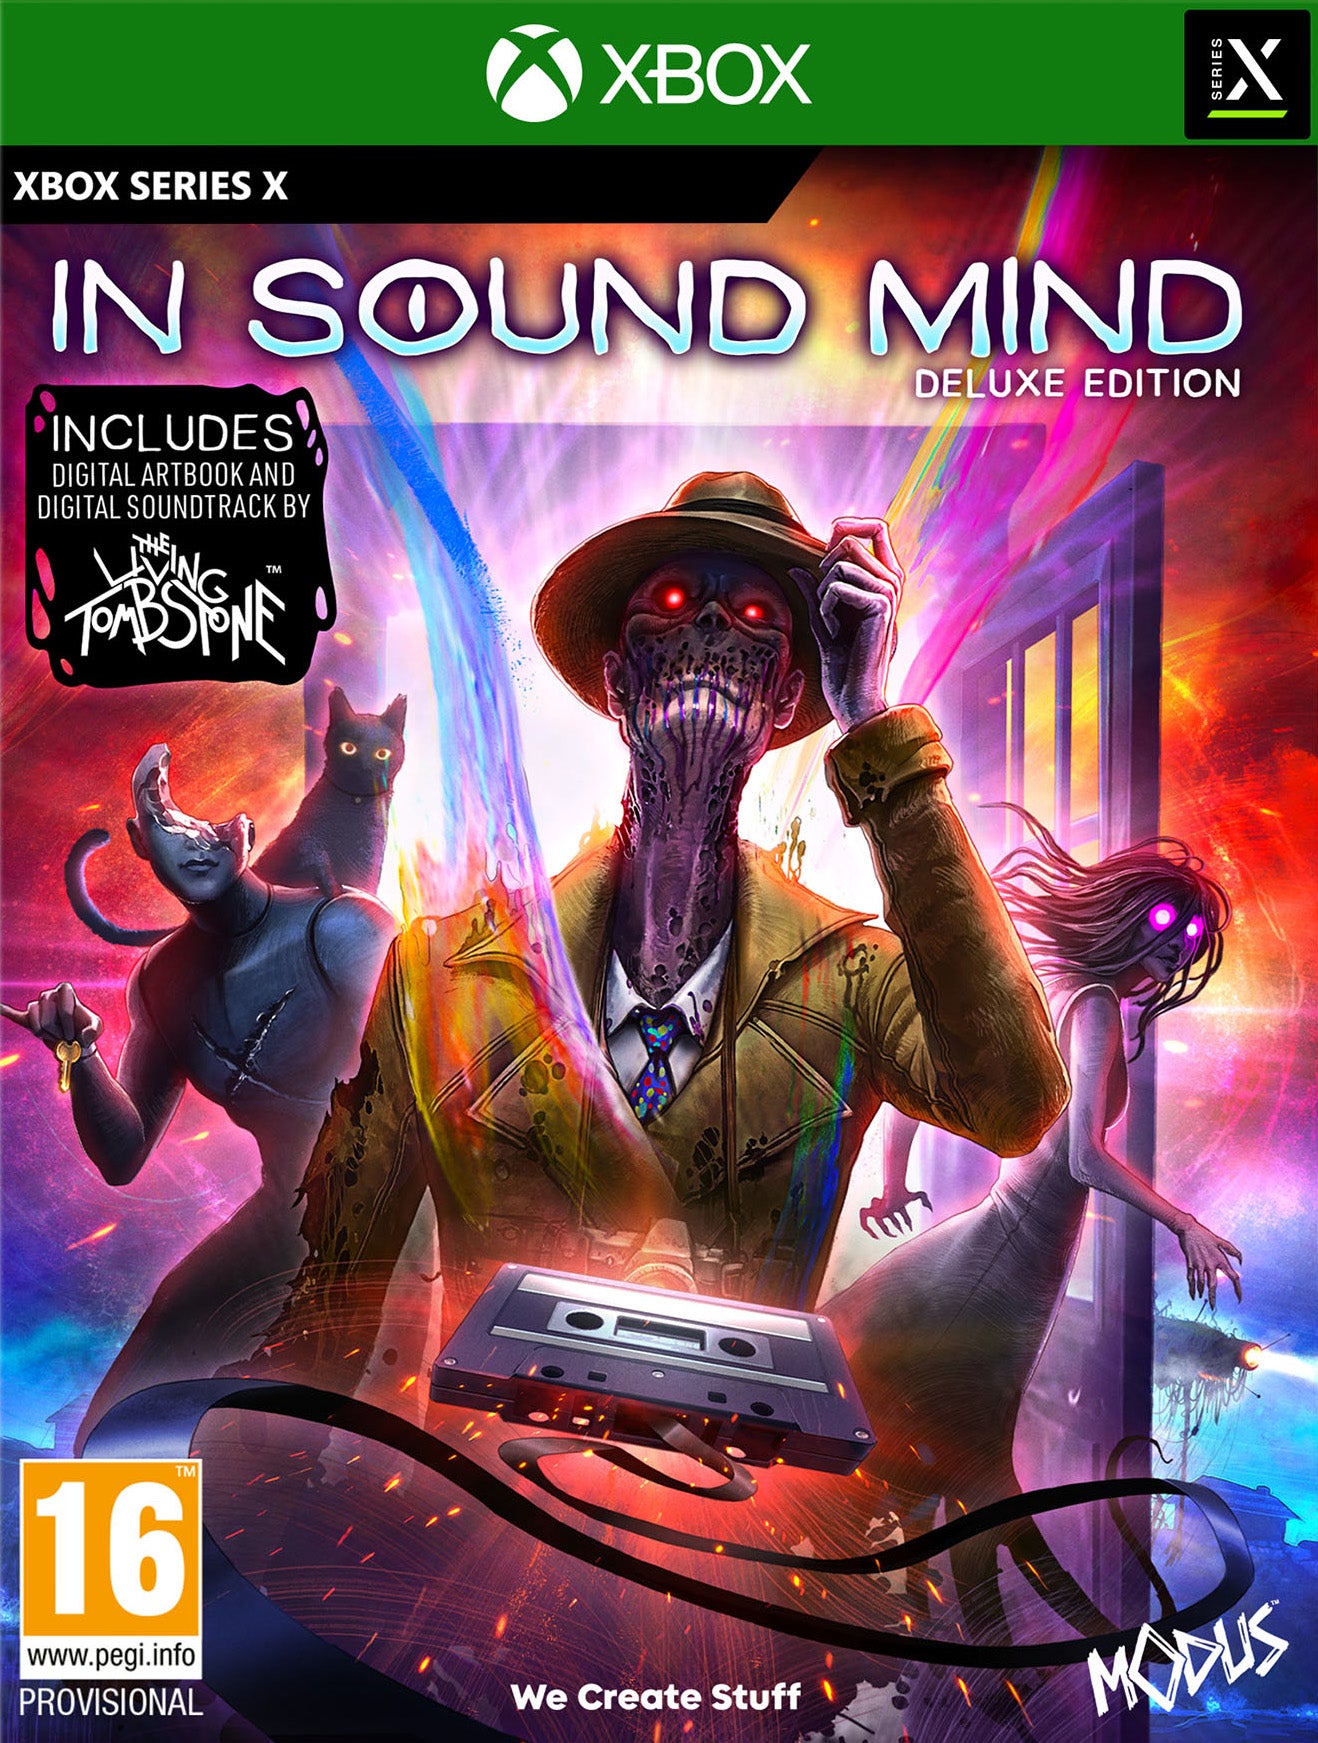 In Sound Mind Deluxe Edition